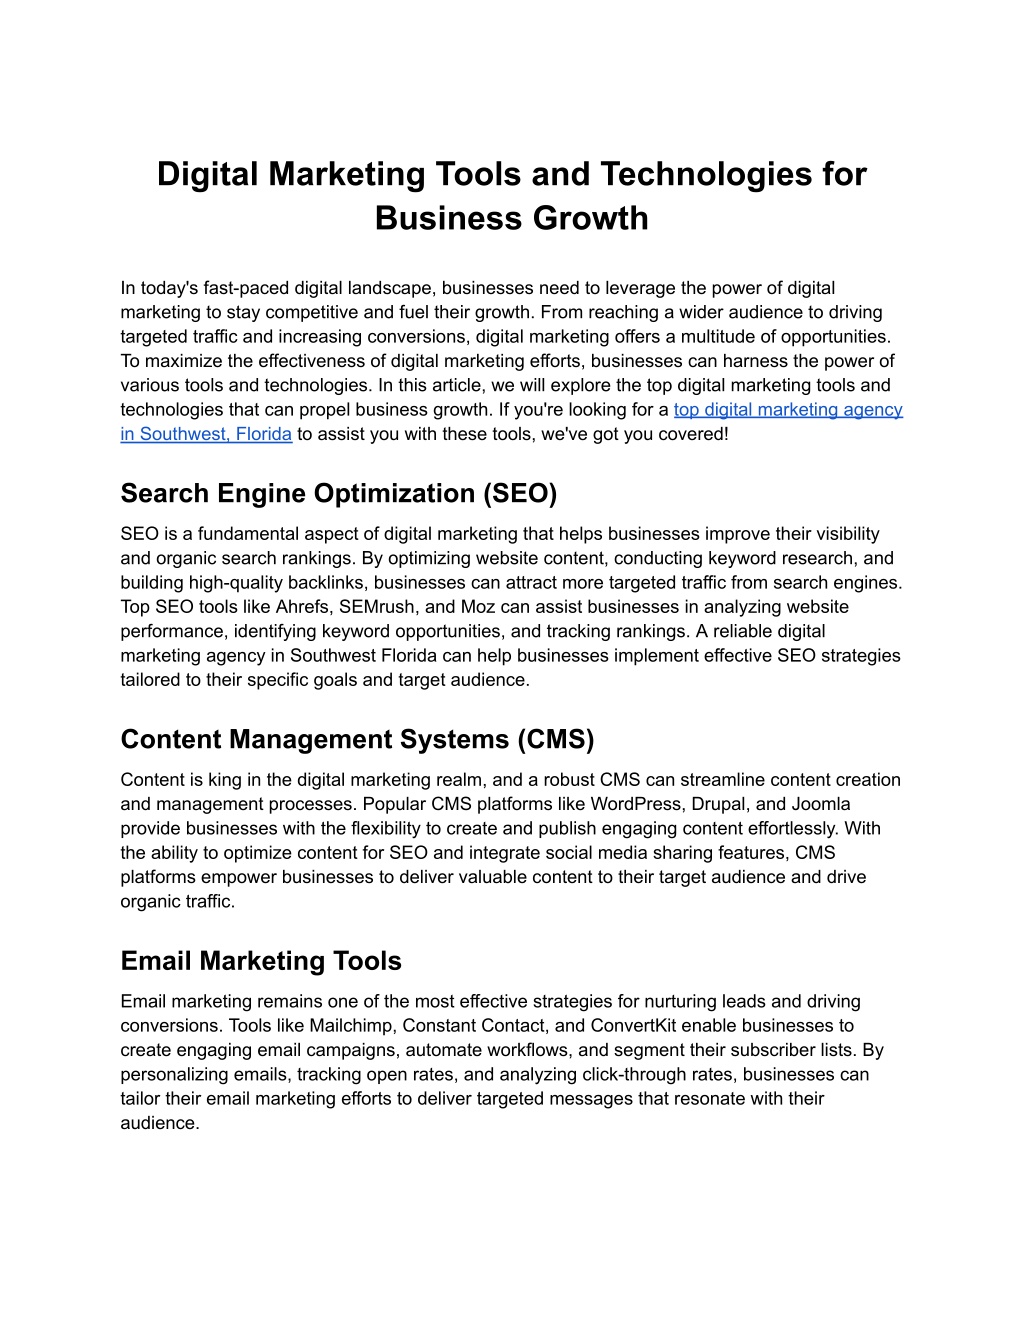 PPT - Digital Marketing Tools and Technologies for Business Growth ...